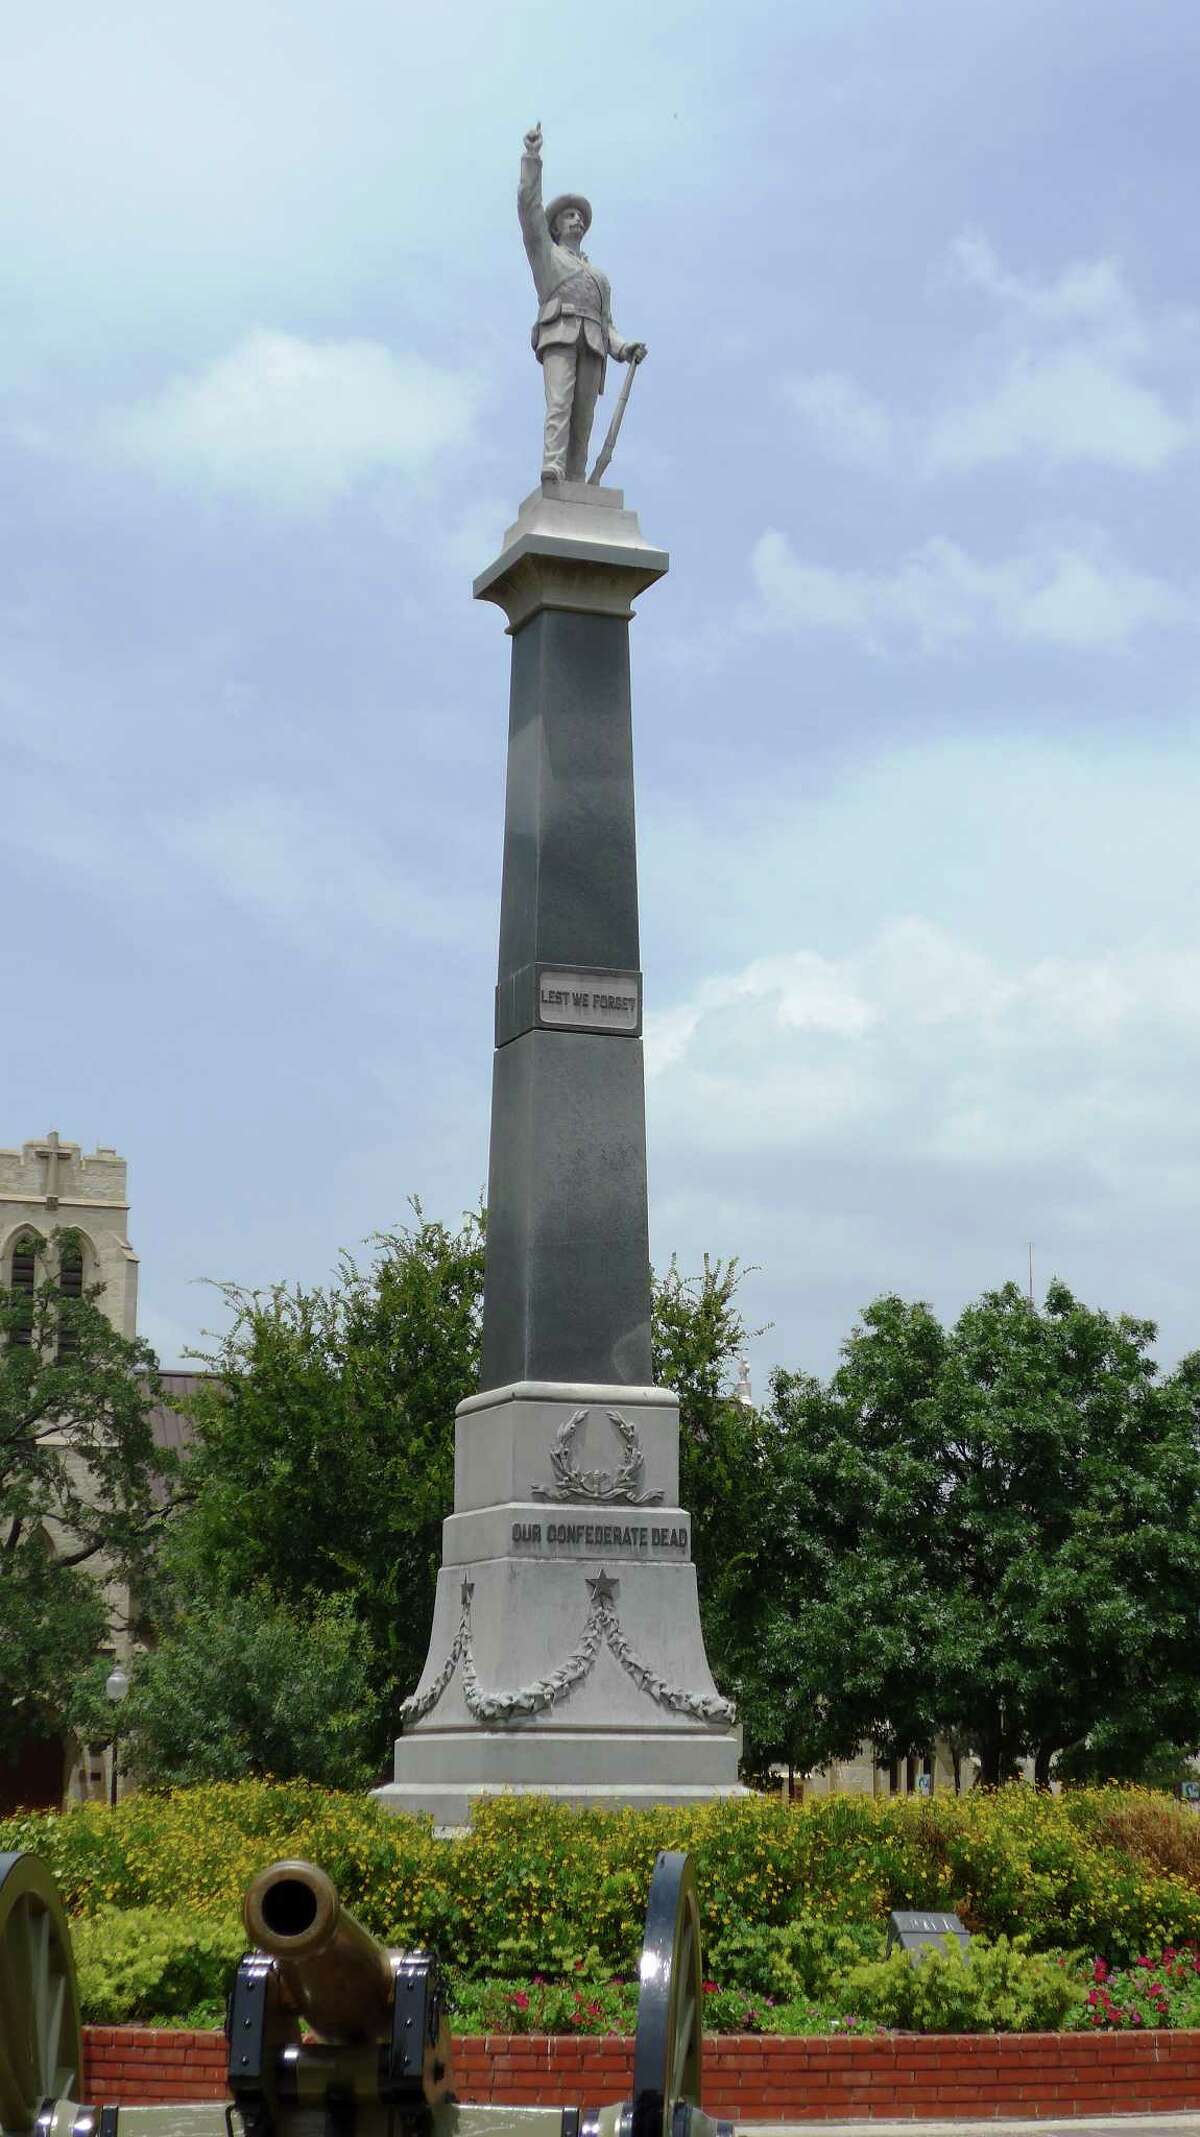 A monument to Confederate war dead, erected in city-owned Travis Park in 1899, says "Lest We Forget" and "Our Confederate Dead." Shown Wednesday, July 8, 2015.